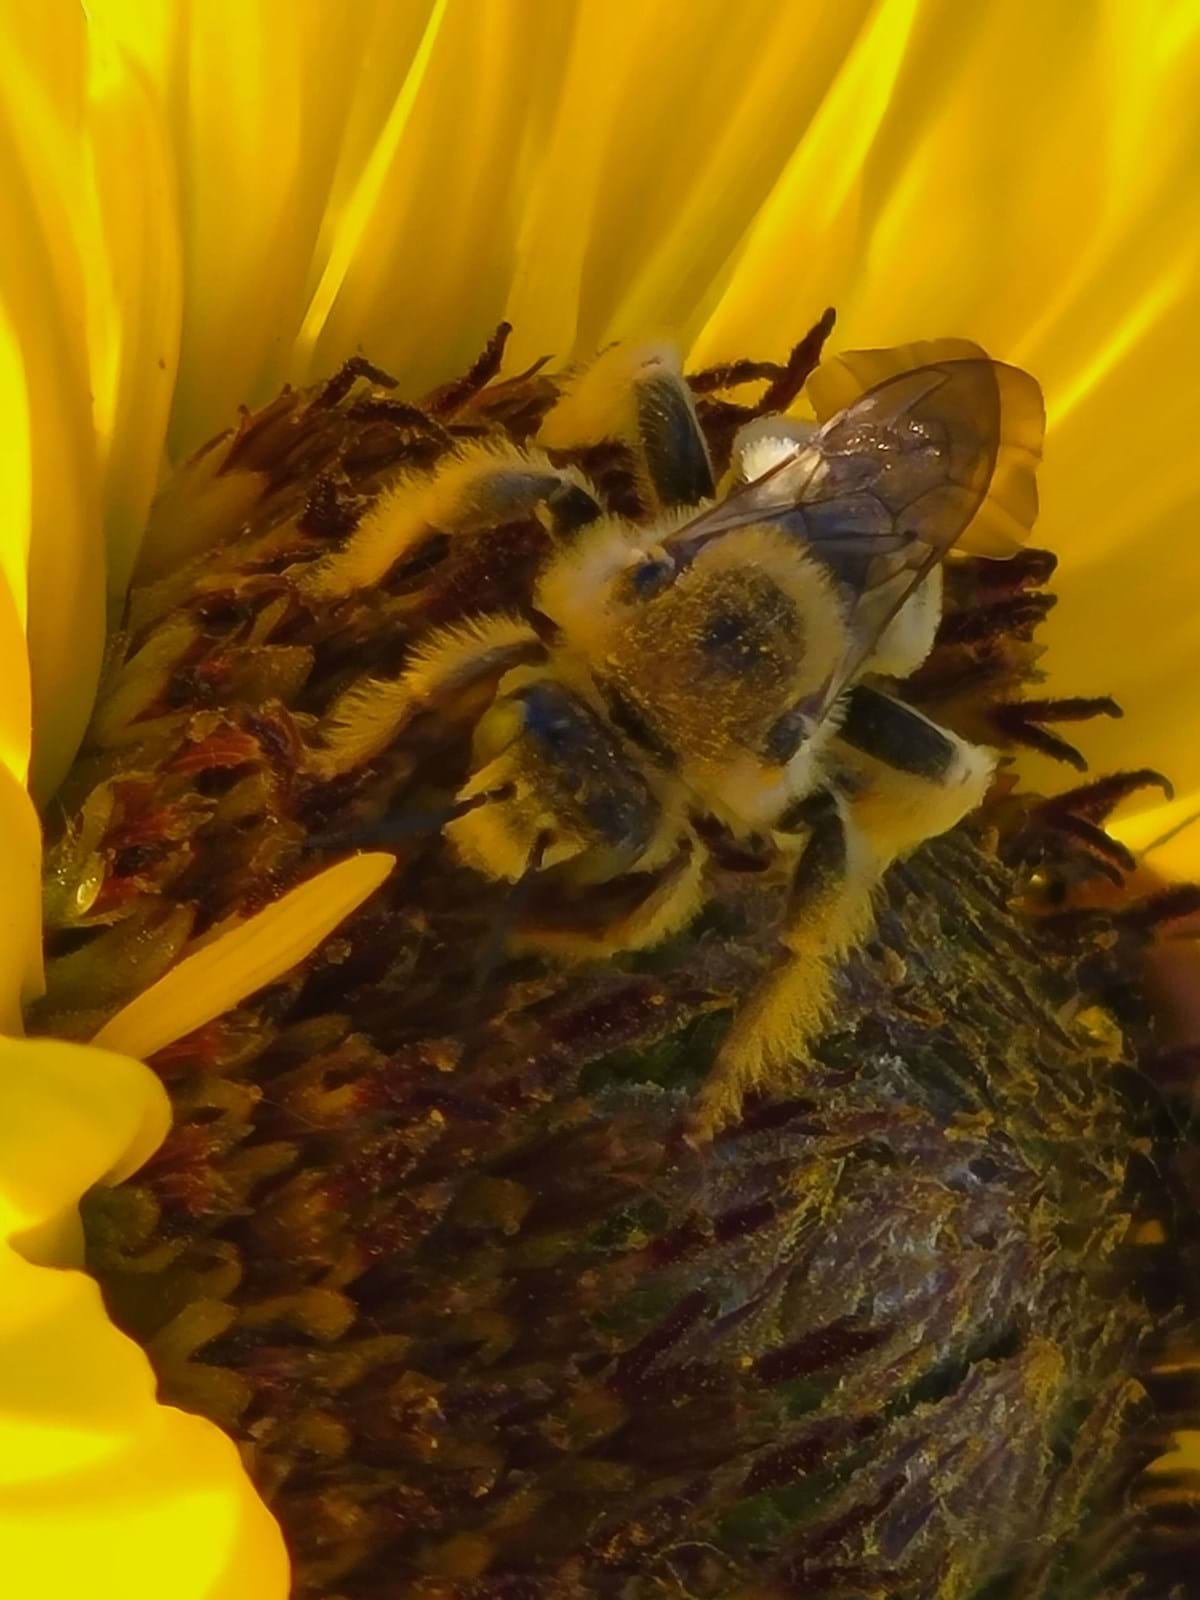 Hairy bee on sunflower plant